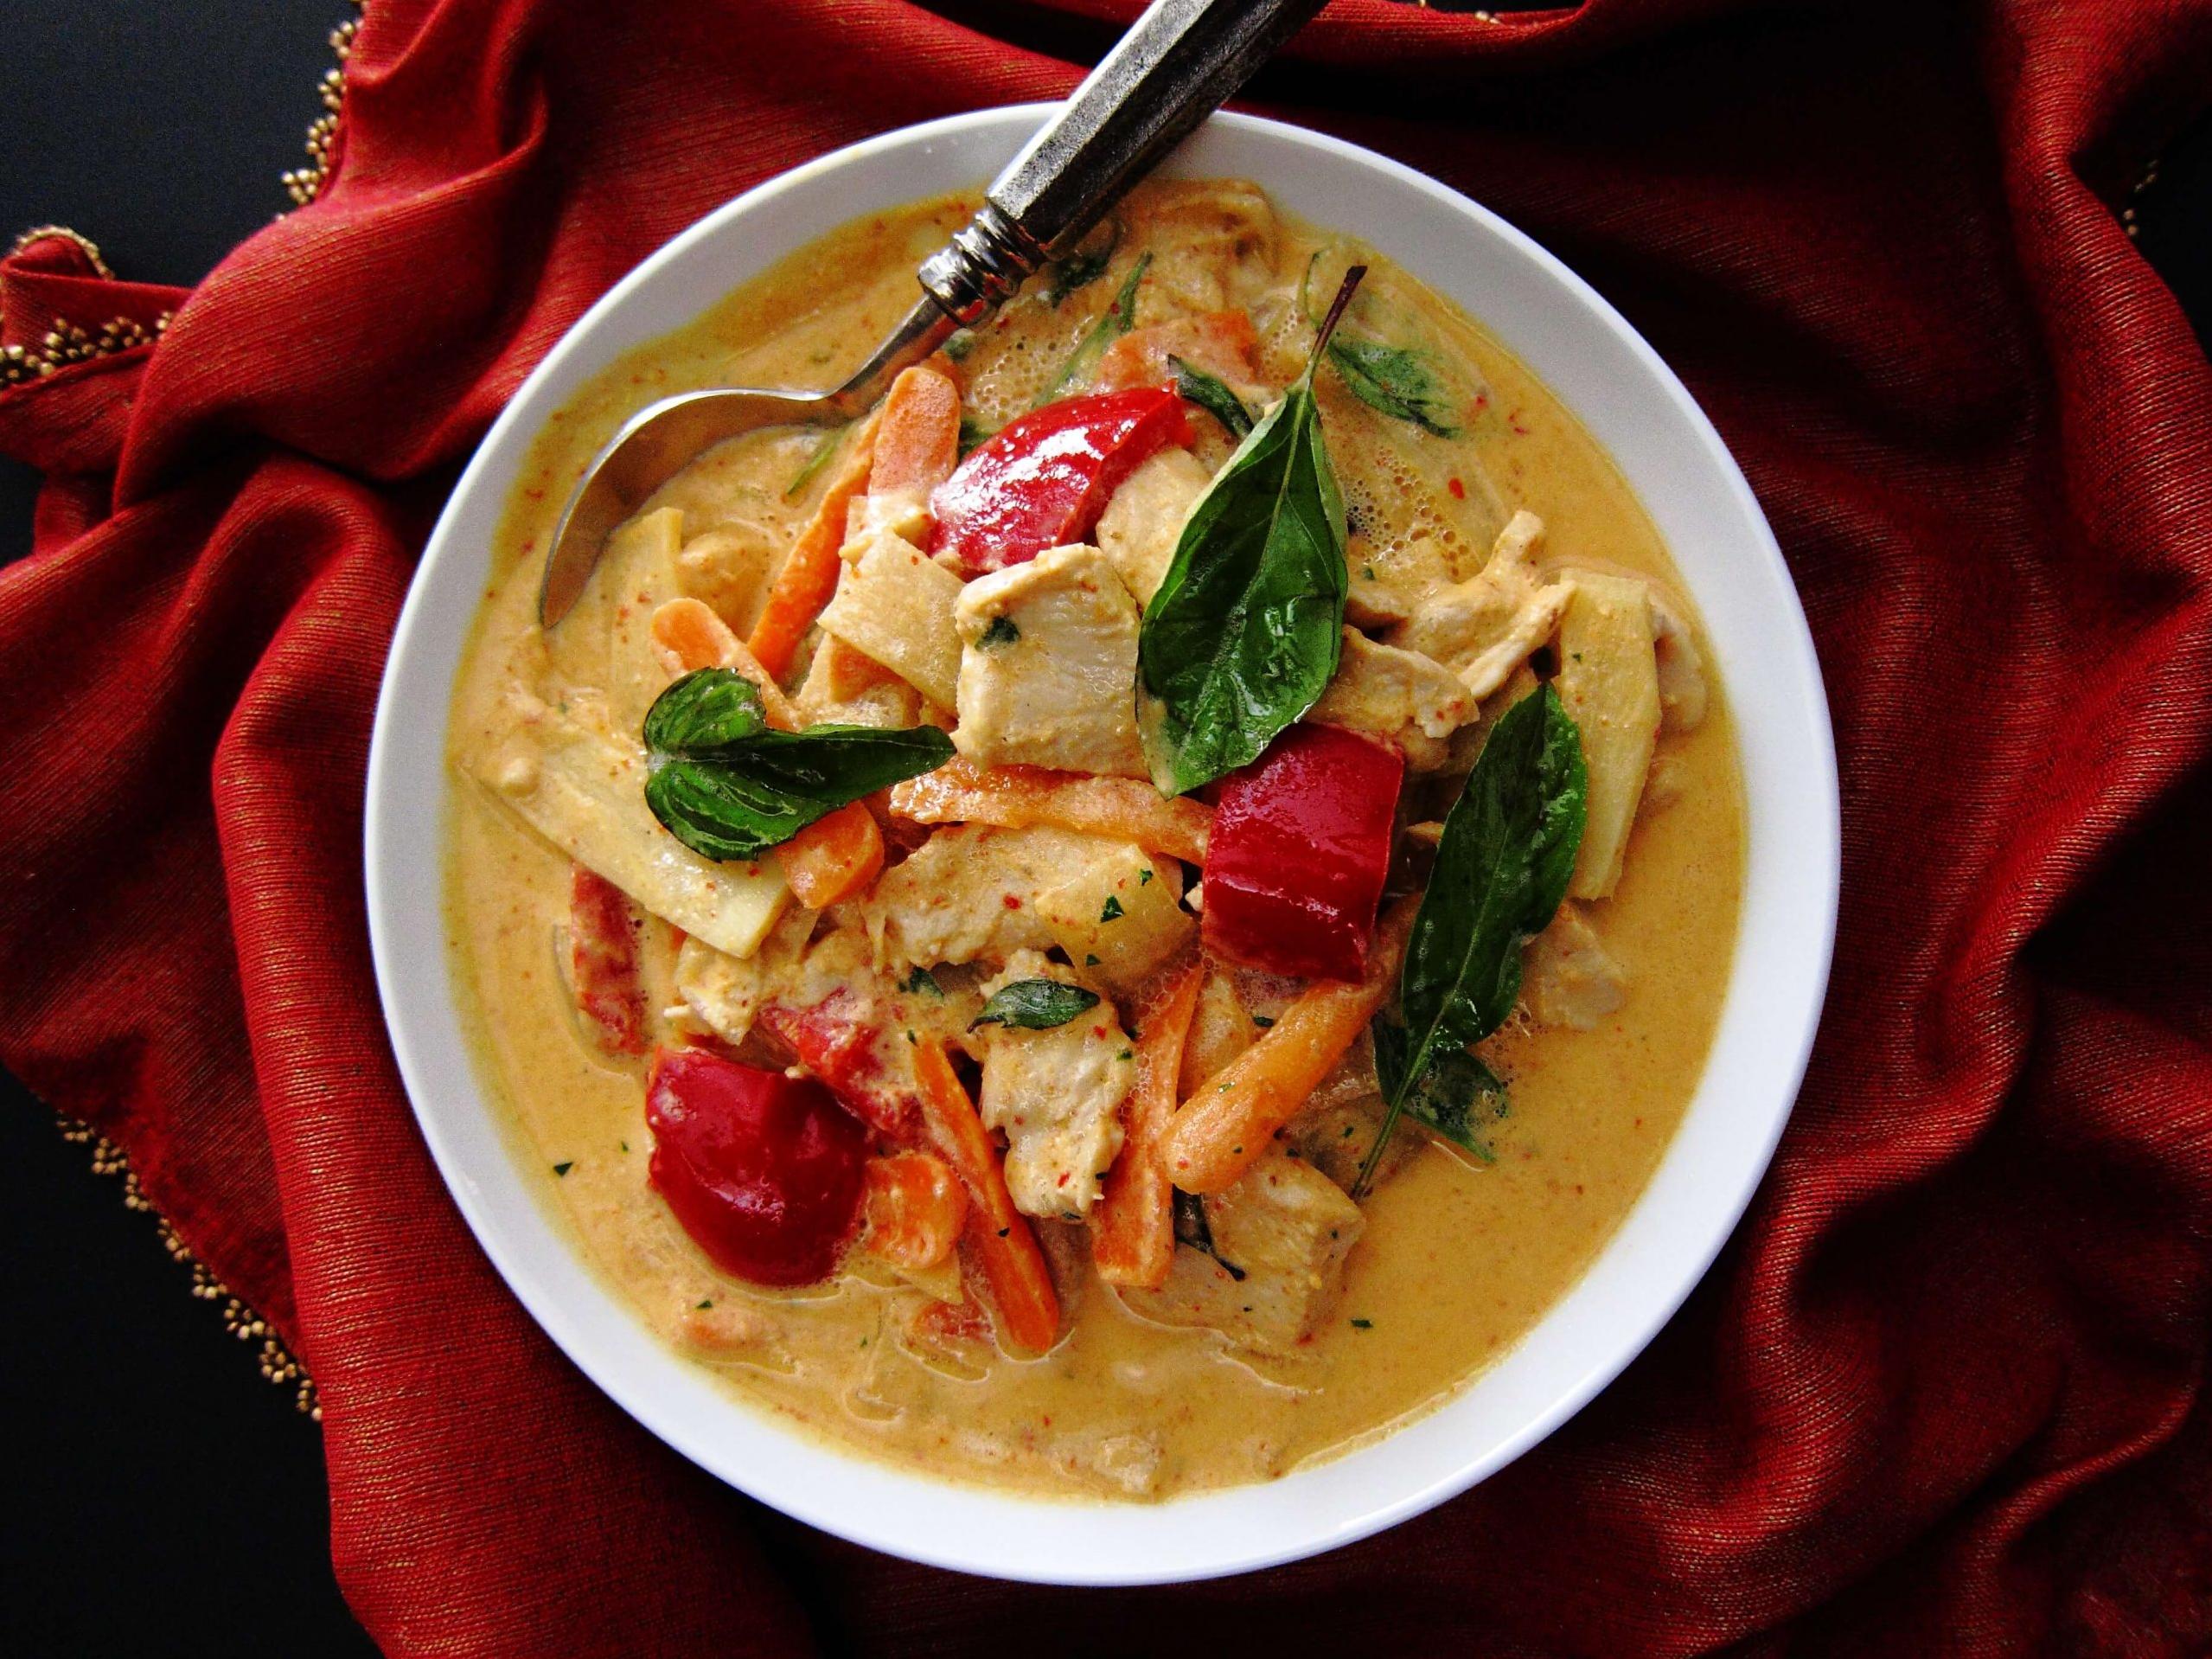  This chicken red curry is the perfect comfort food, especially on chilly nights.